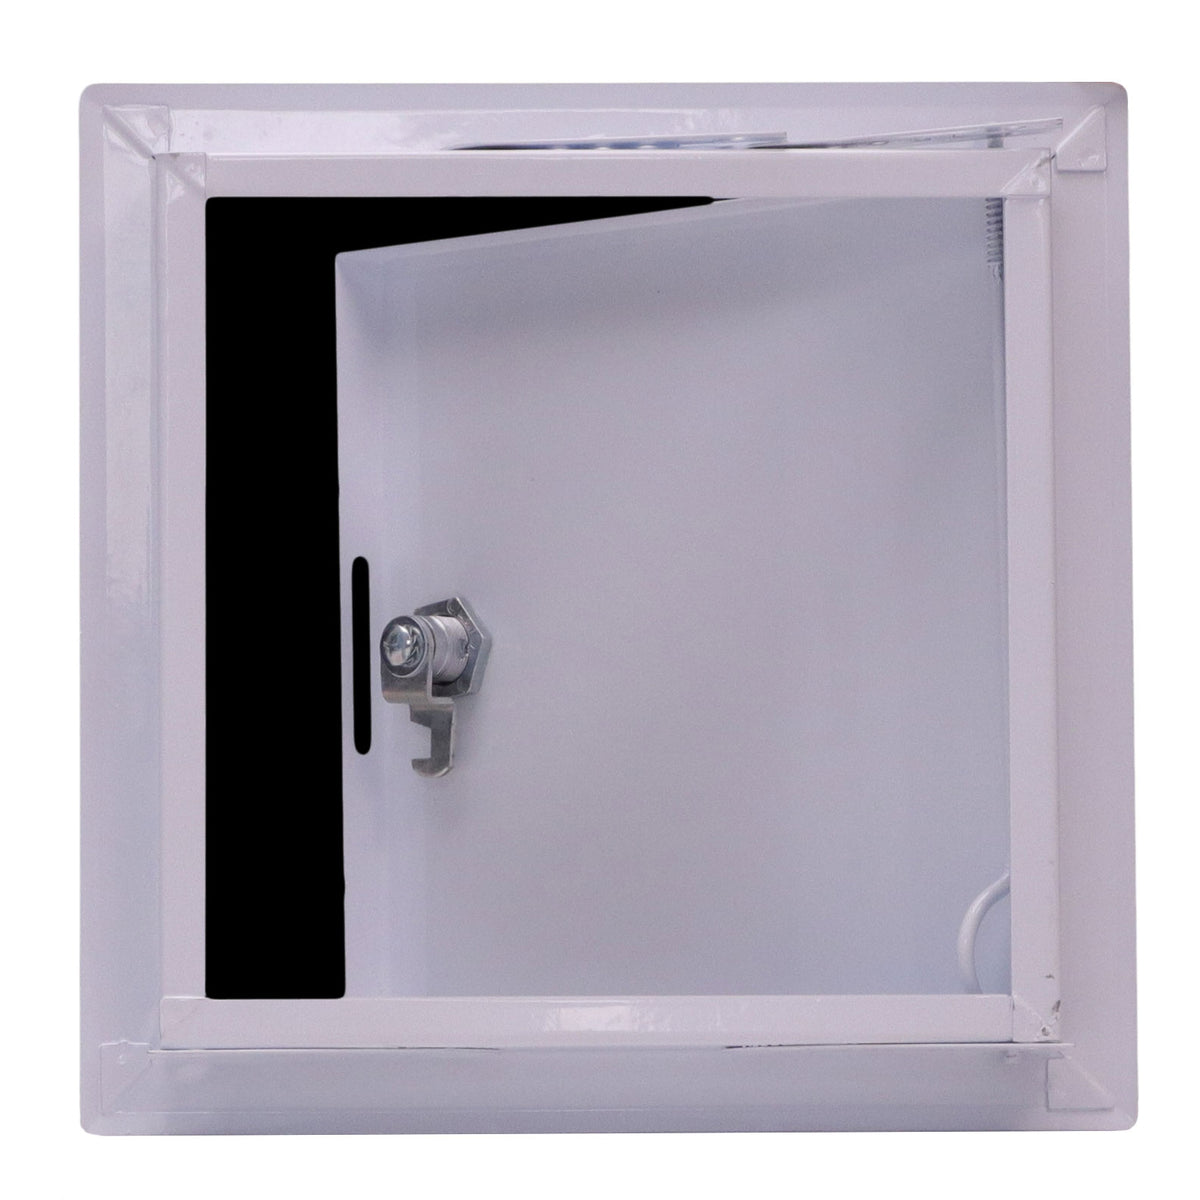 16&quot; X 16&quot; Steel Access Panel Removable Door For Wall / Ceiling Application (Lock and Key) With Frame - [Outer Dimensions: 17&quot; Width X 17&quot; Height]